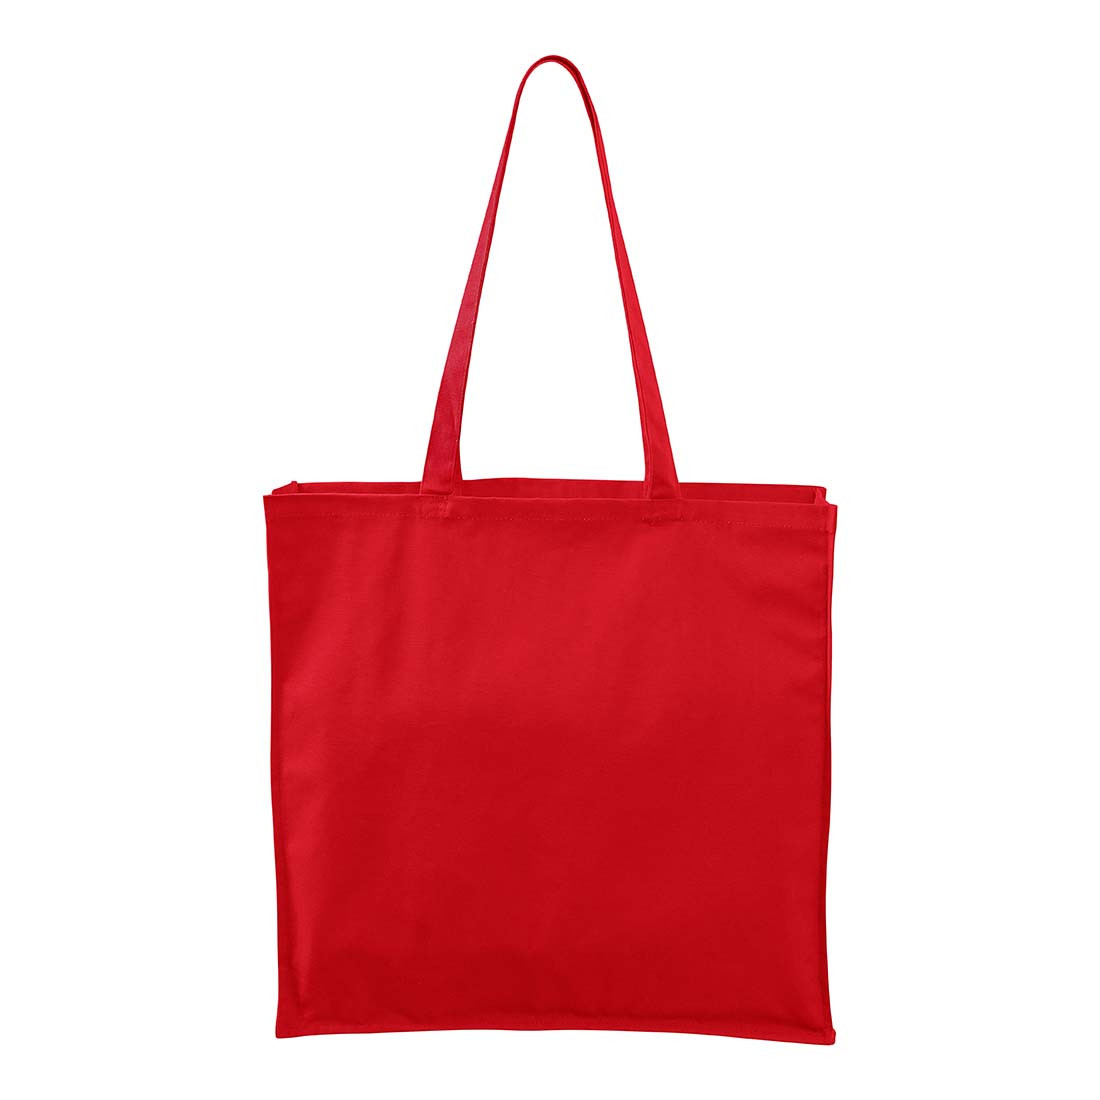 CARRY Shopping Bag - Technical